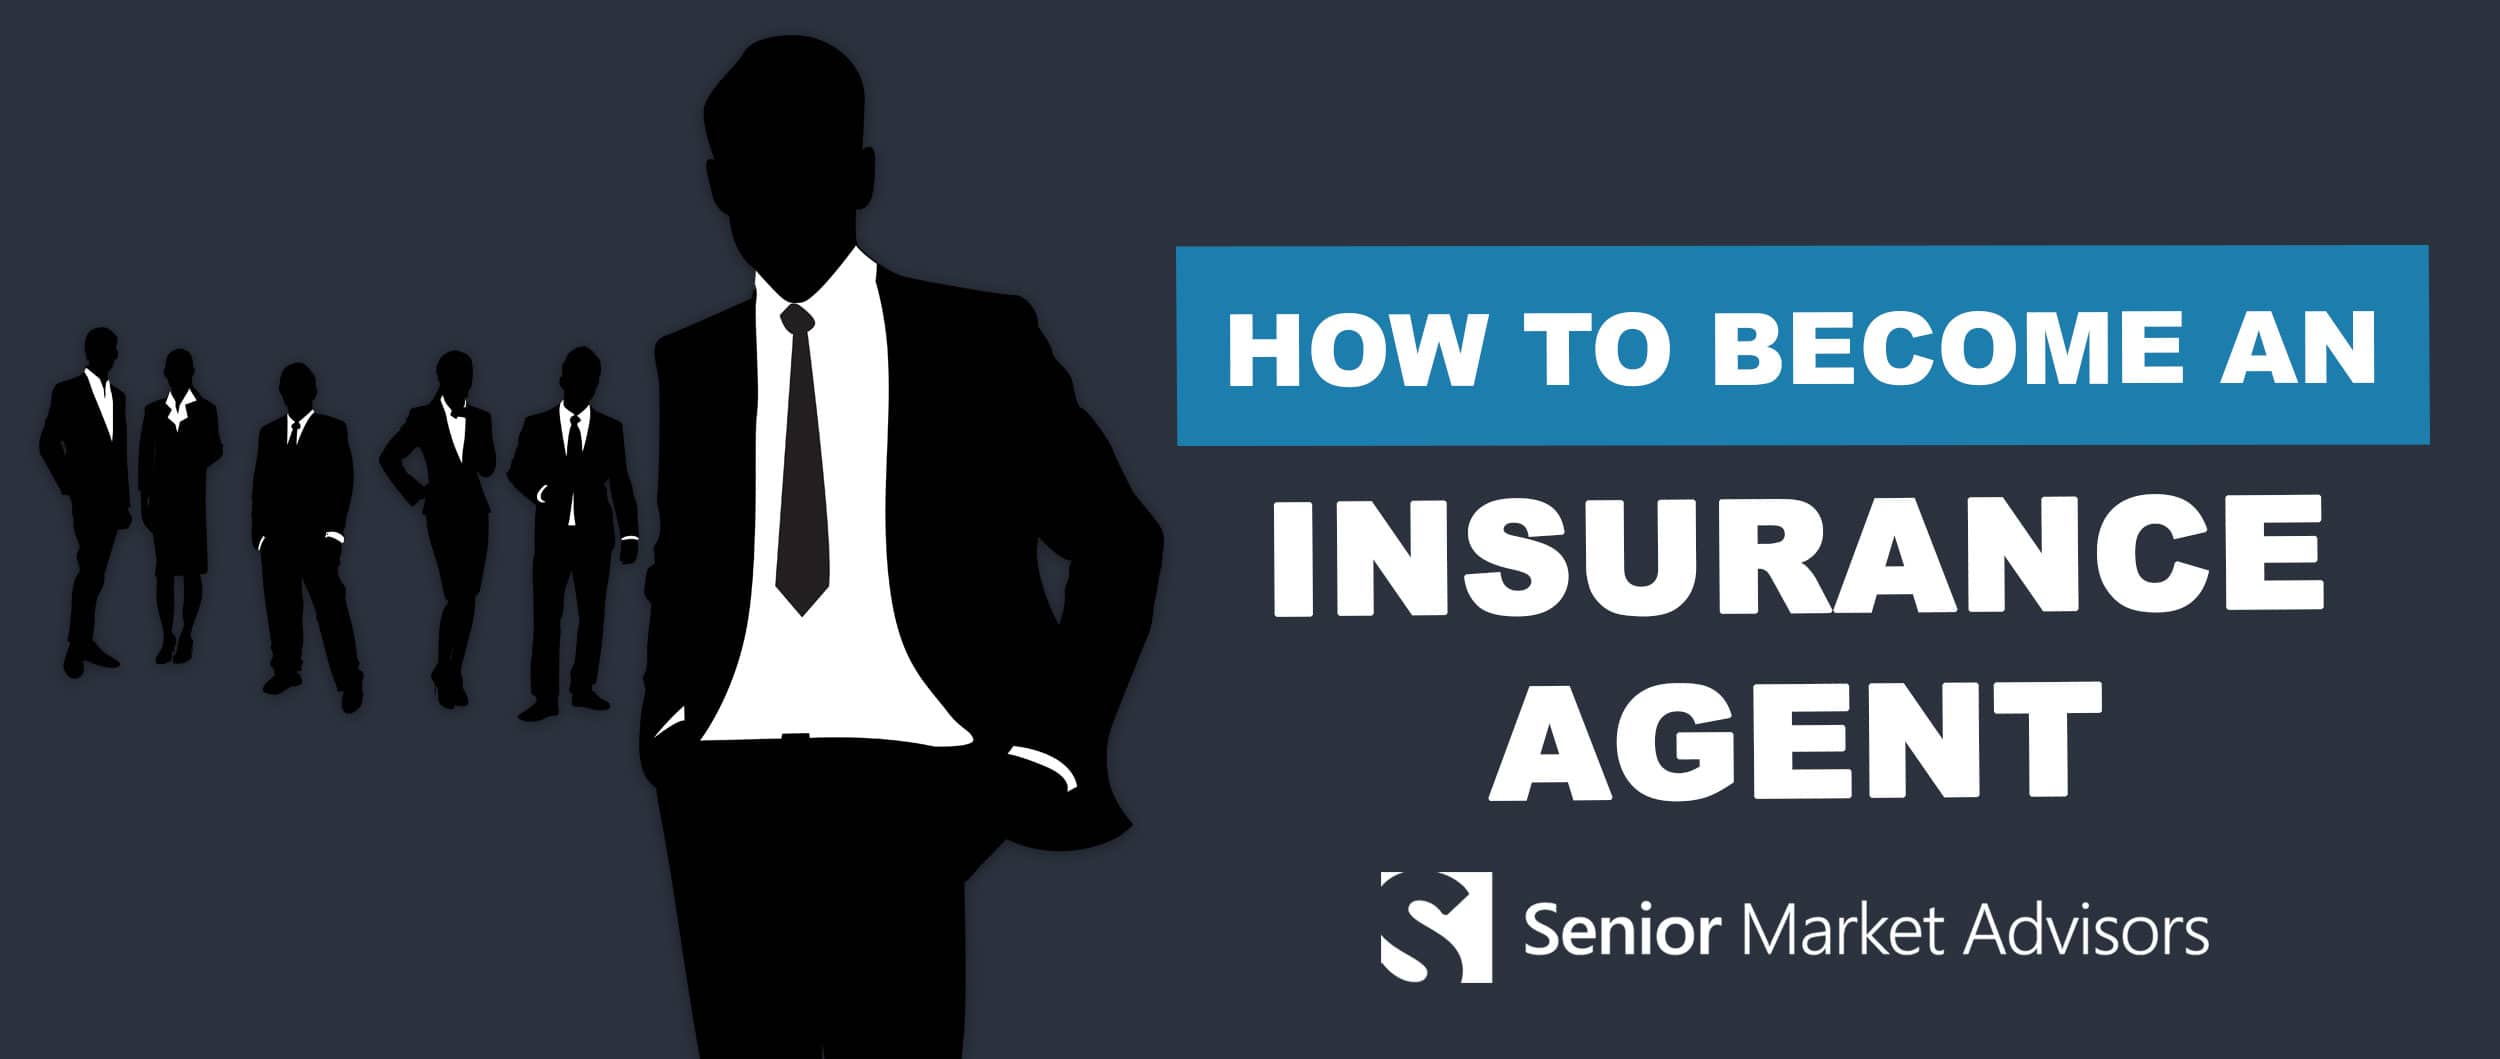 How To Become An Insurance Agent in 3 Steps | Senior Market Advisors